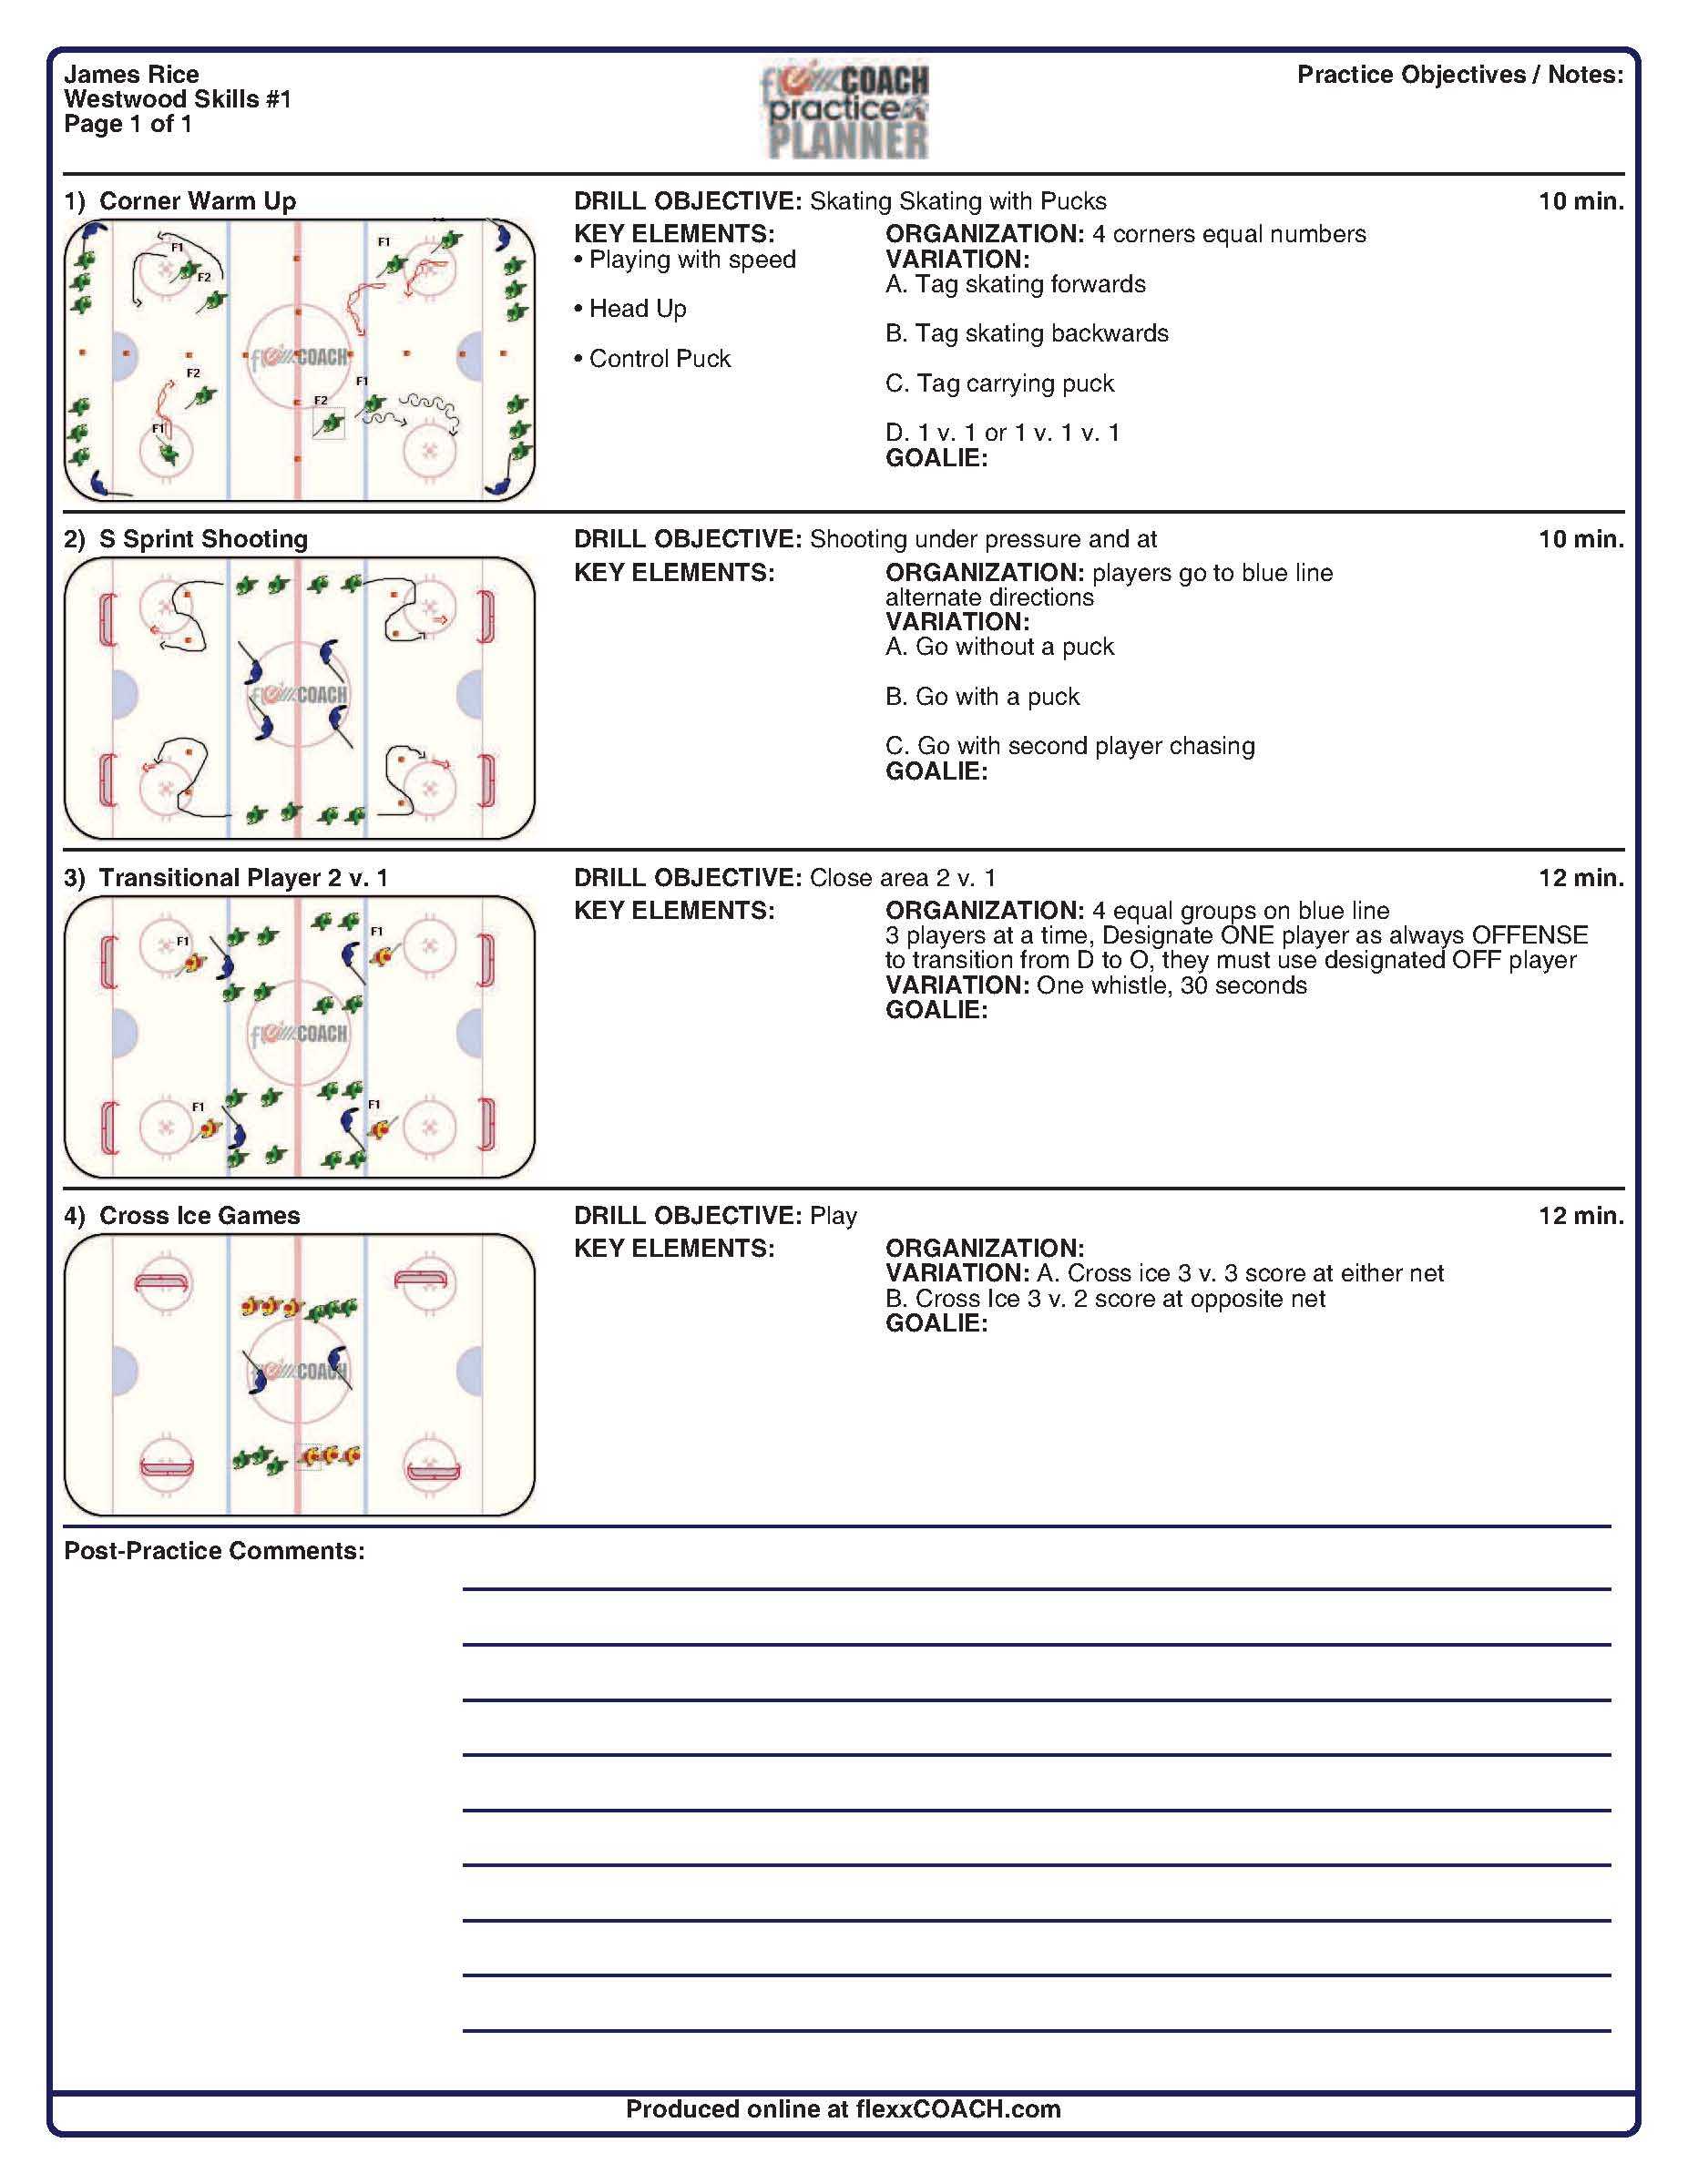 Drill Exchange | Westwood Youth Hockey Pertaining To Blank Hockey Practice Plan Template